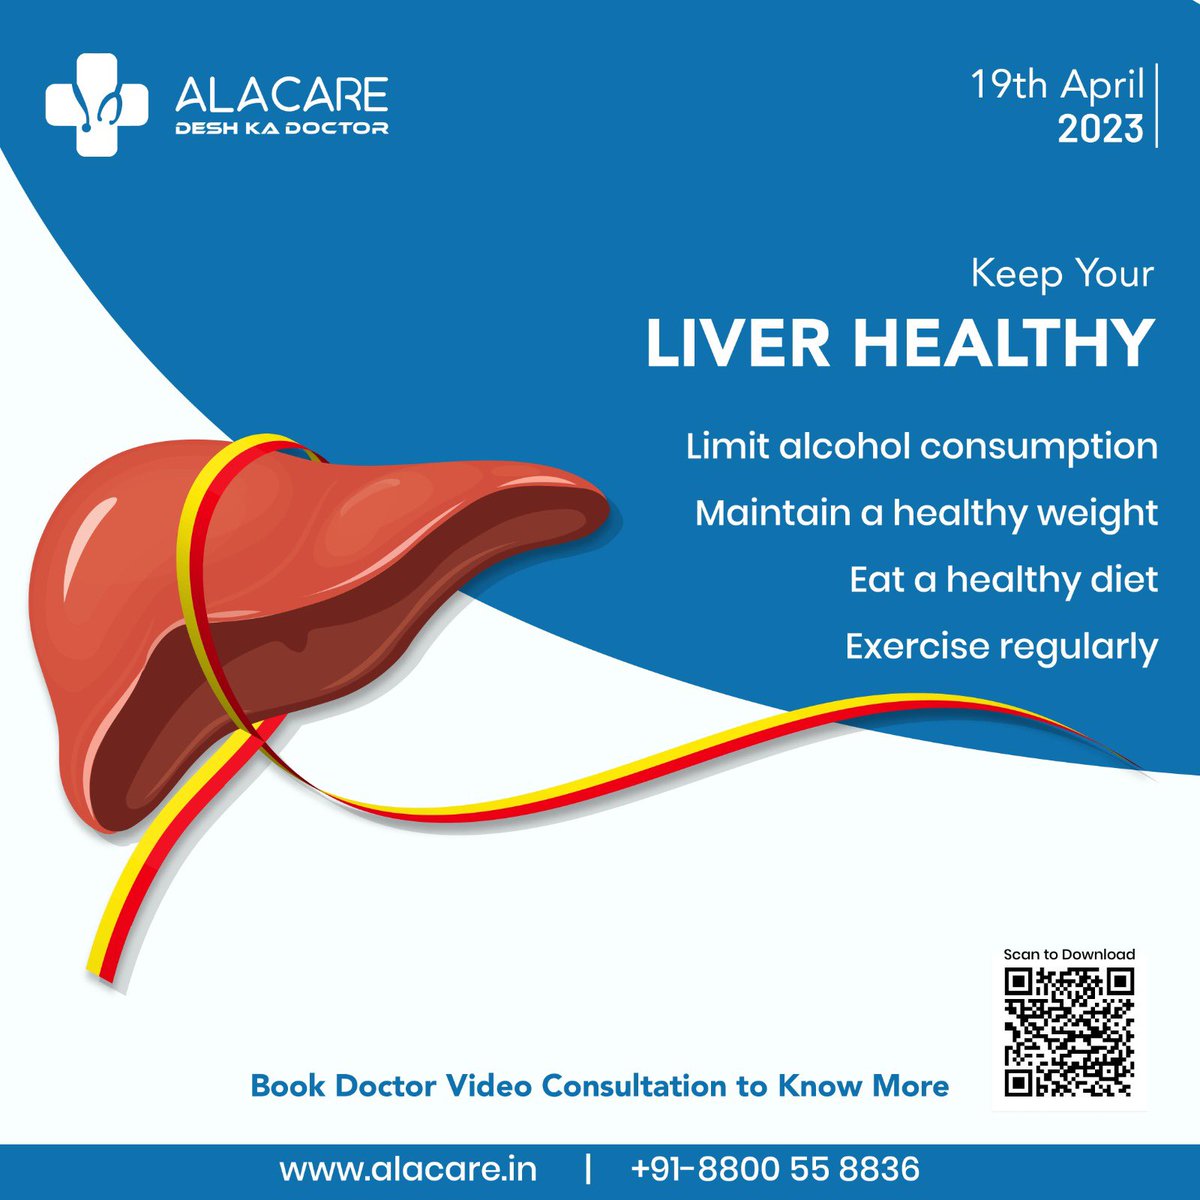 Liver diseases are the tenth most common cause of death in India.
On #WorldLiverDay, take the pledge to follow a healthy lifestyle to protect your liver and keep it healthy.
Healthy Liver, Healthy Living!
#WorldLiverDay2023 
#Alacare
#deshkadoctor #consultation